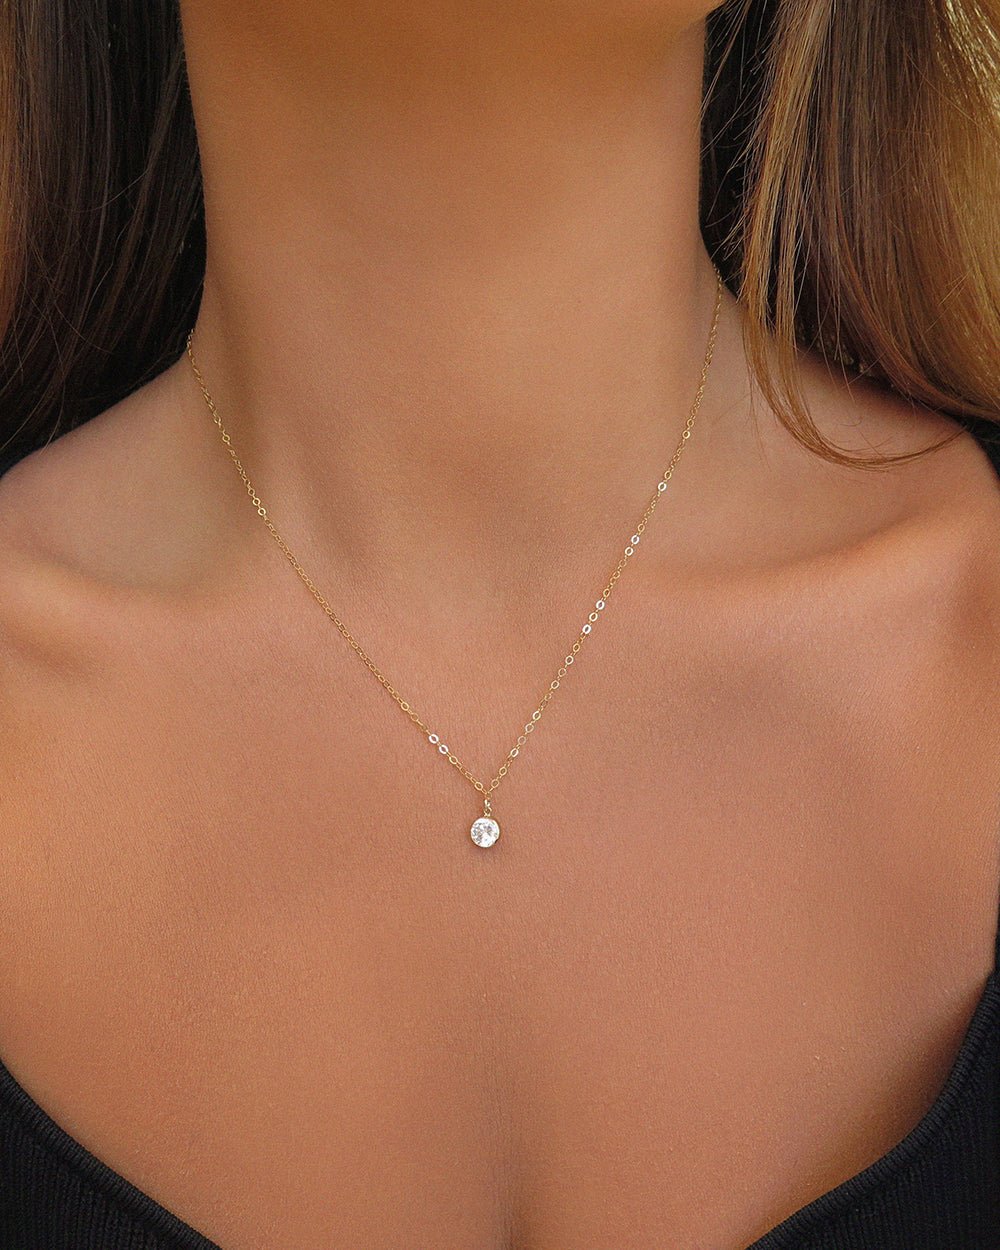 LARGE CZ NECKLACE- 14k Yellow Gold - The Littl - Deluxe Chain - 37cm (choker) Necklaces